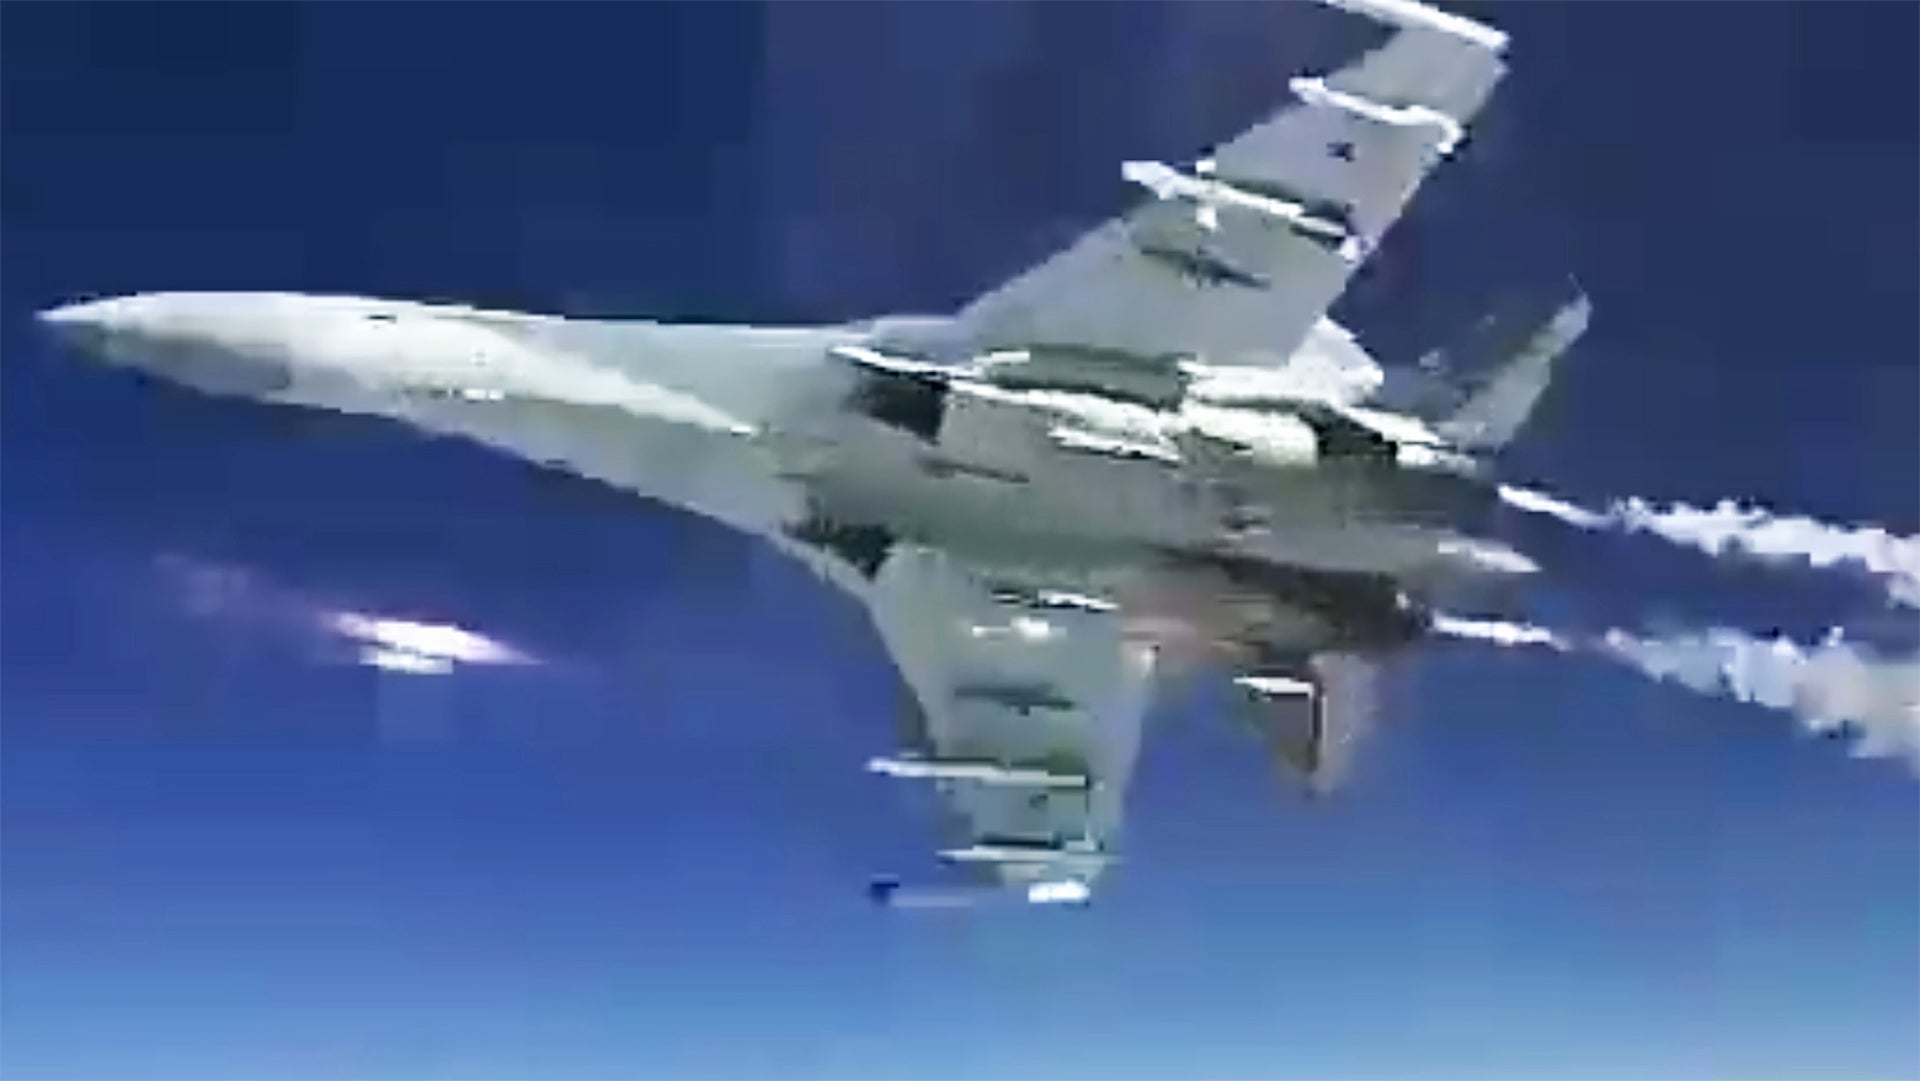 Watch This Russian Flanker Buzz Another At High Altitude In This Crazy Cockpit Video